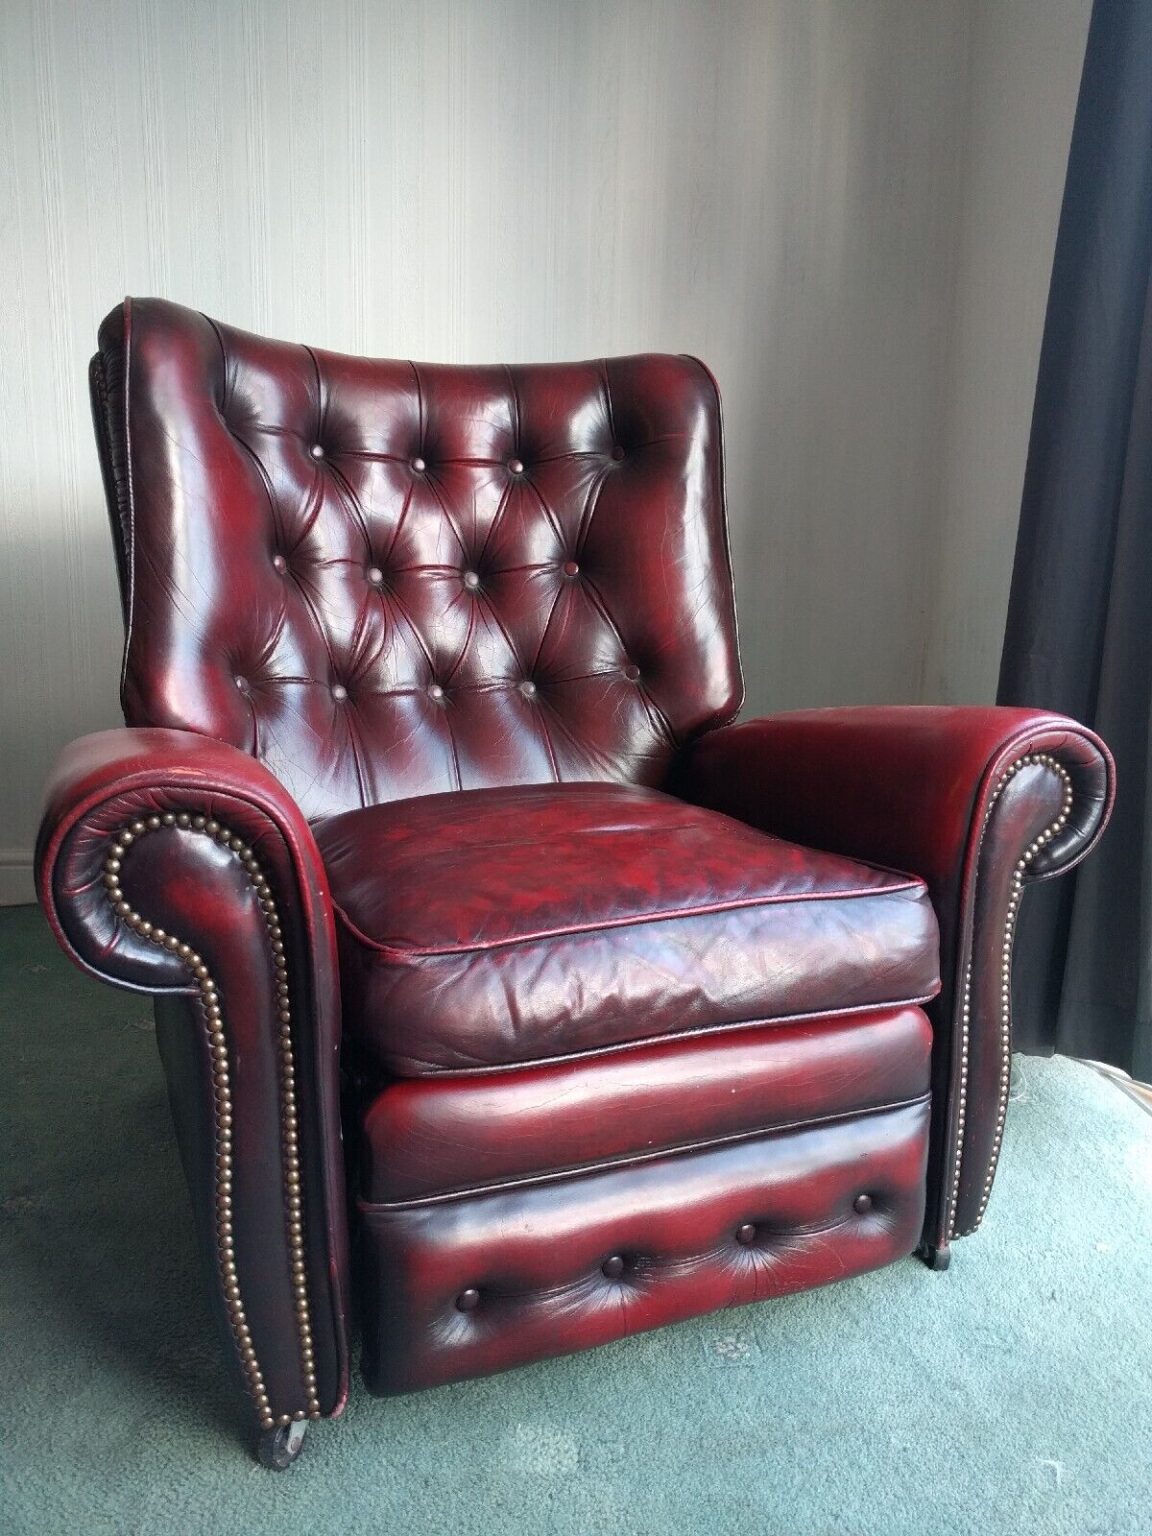 Recliner red Chair. Town and Country Antiques